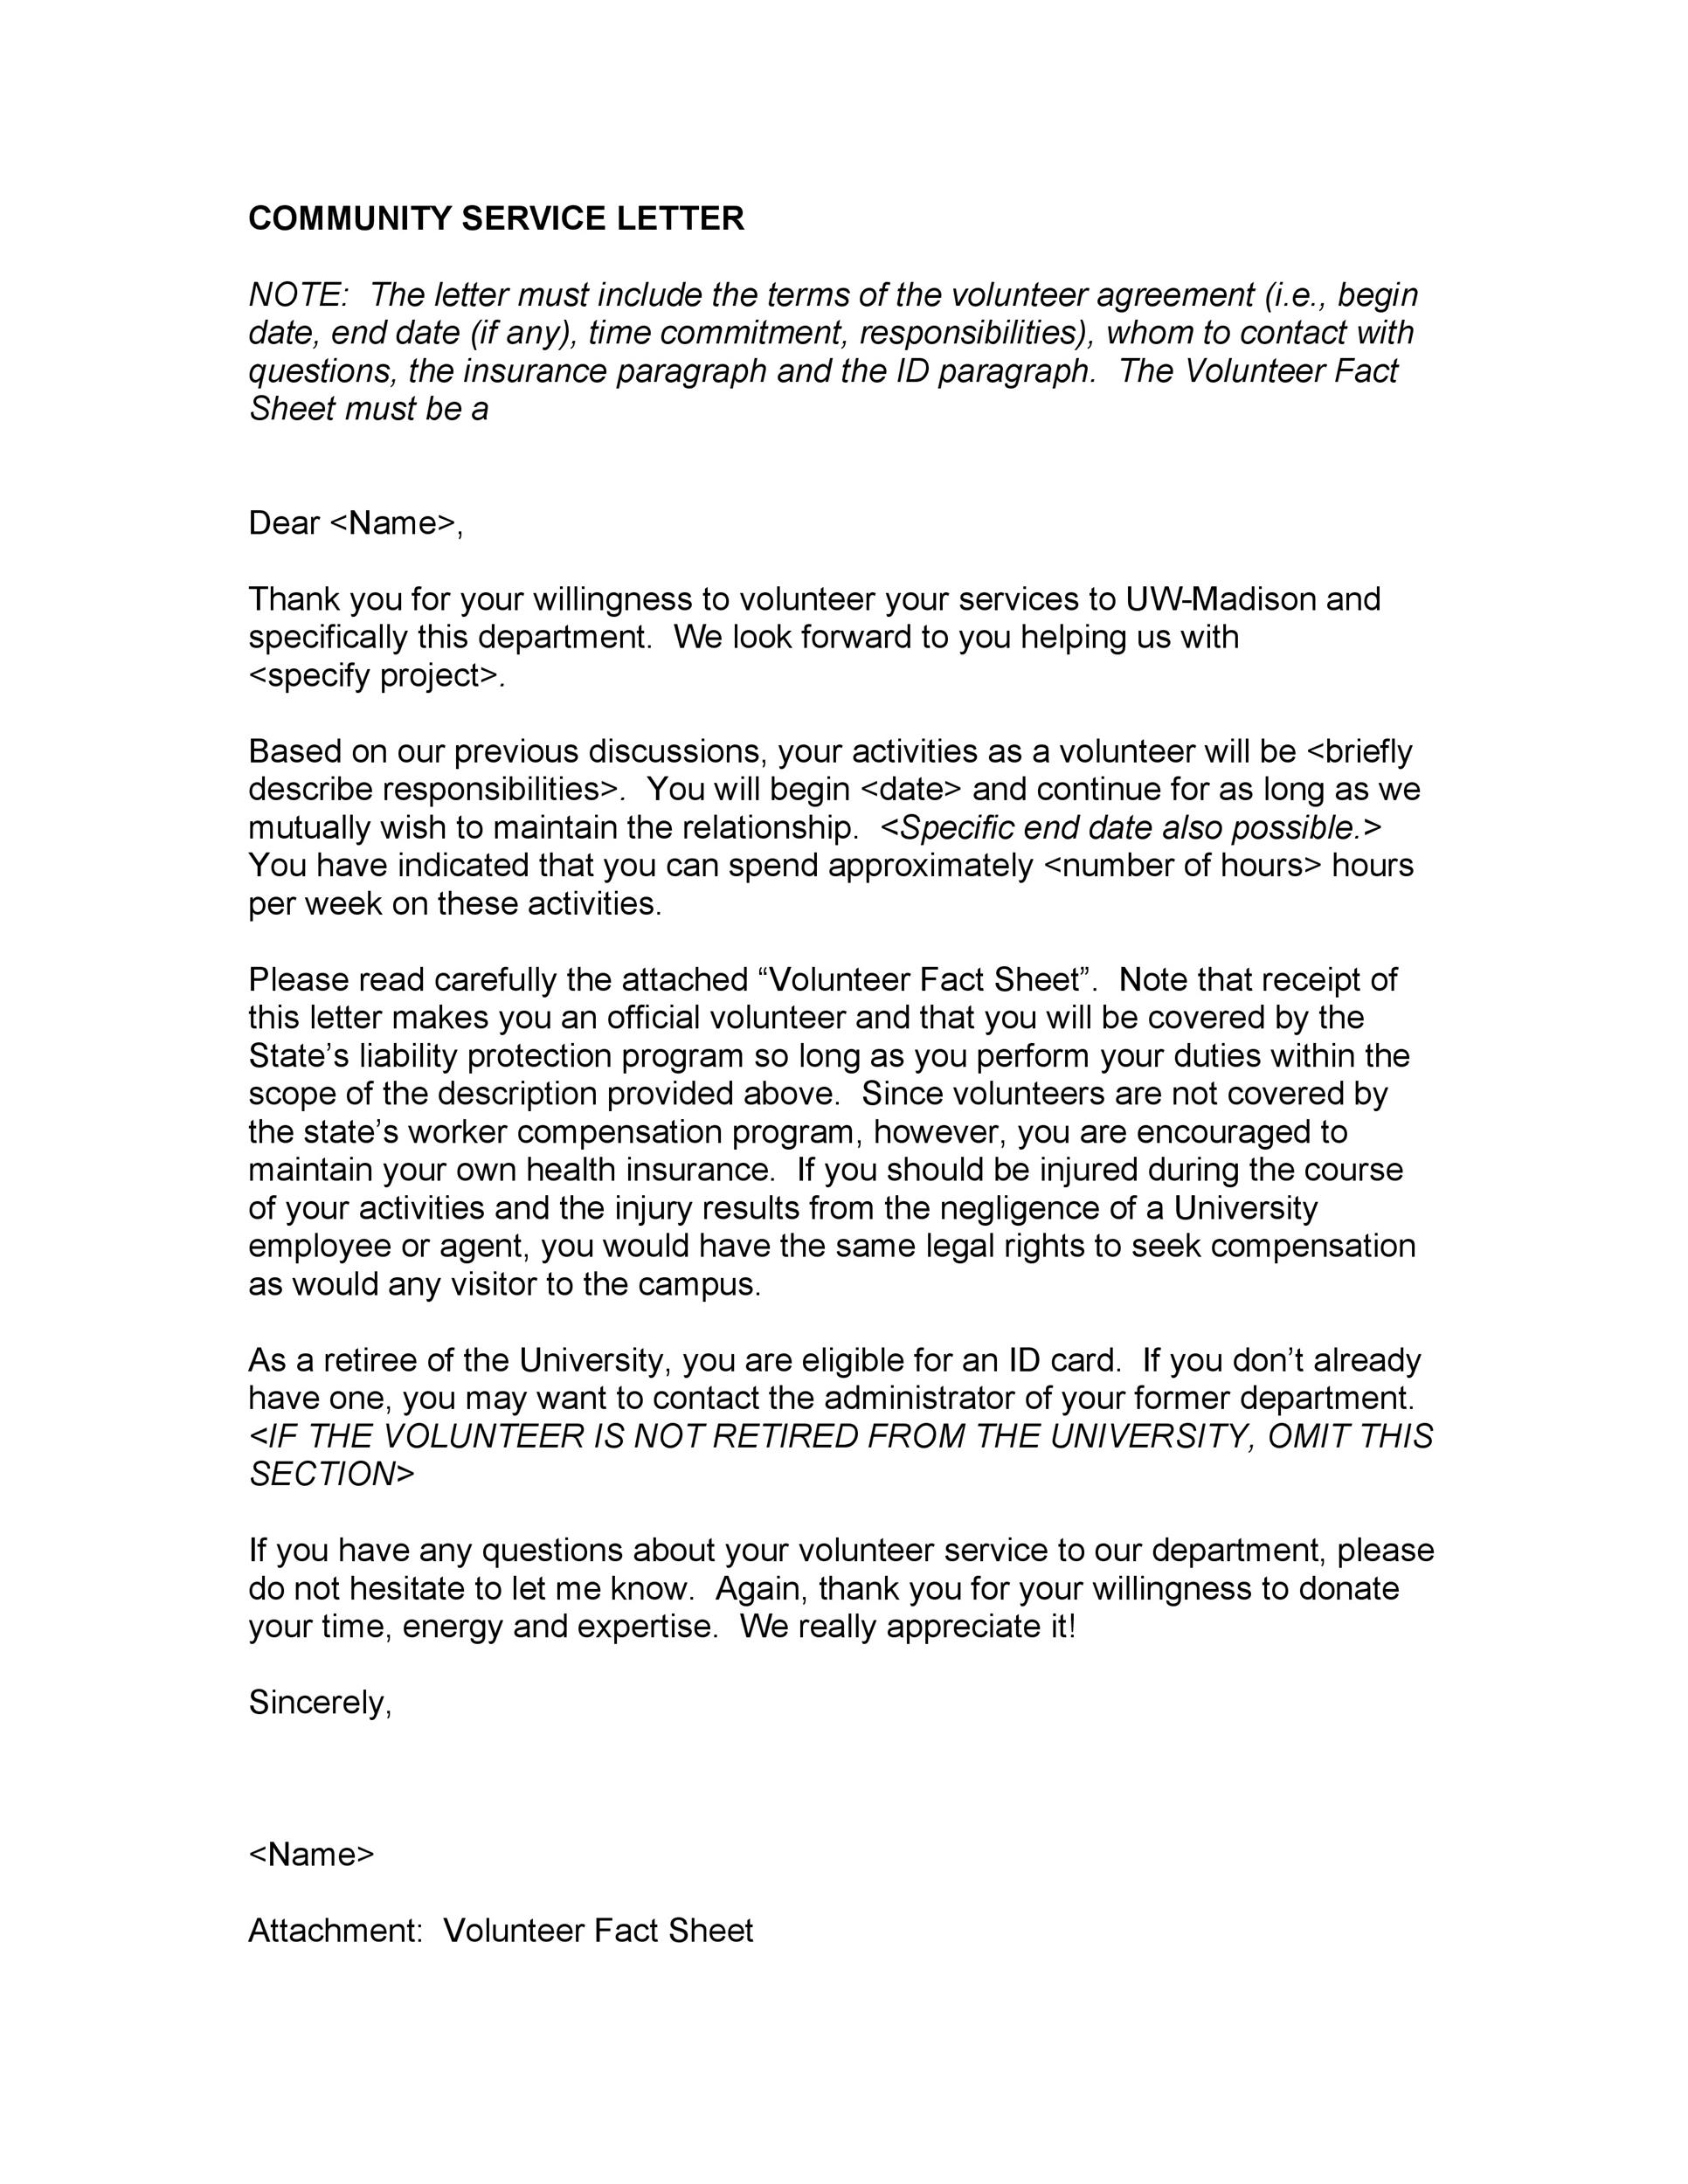 Community Service Letter Format from templatelab.com